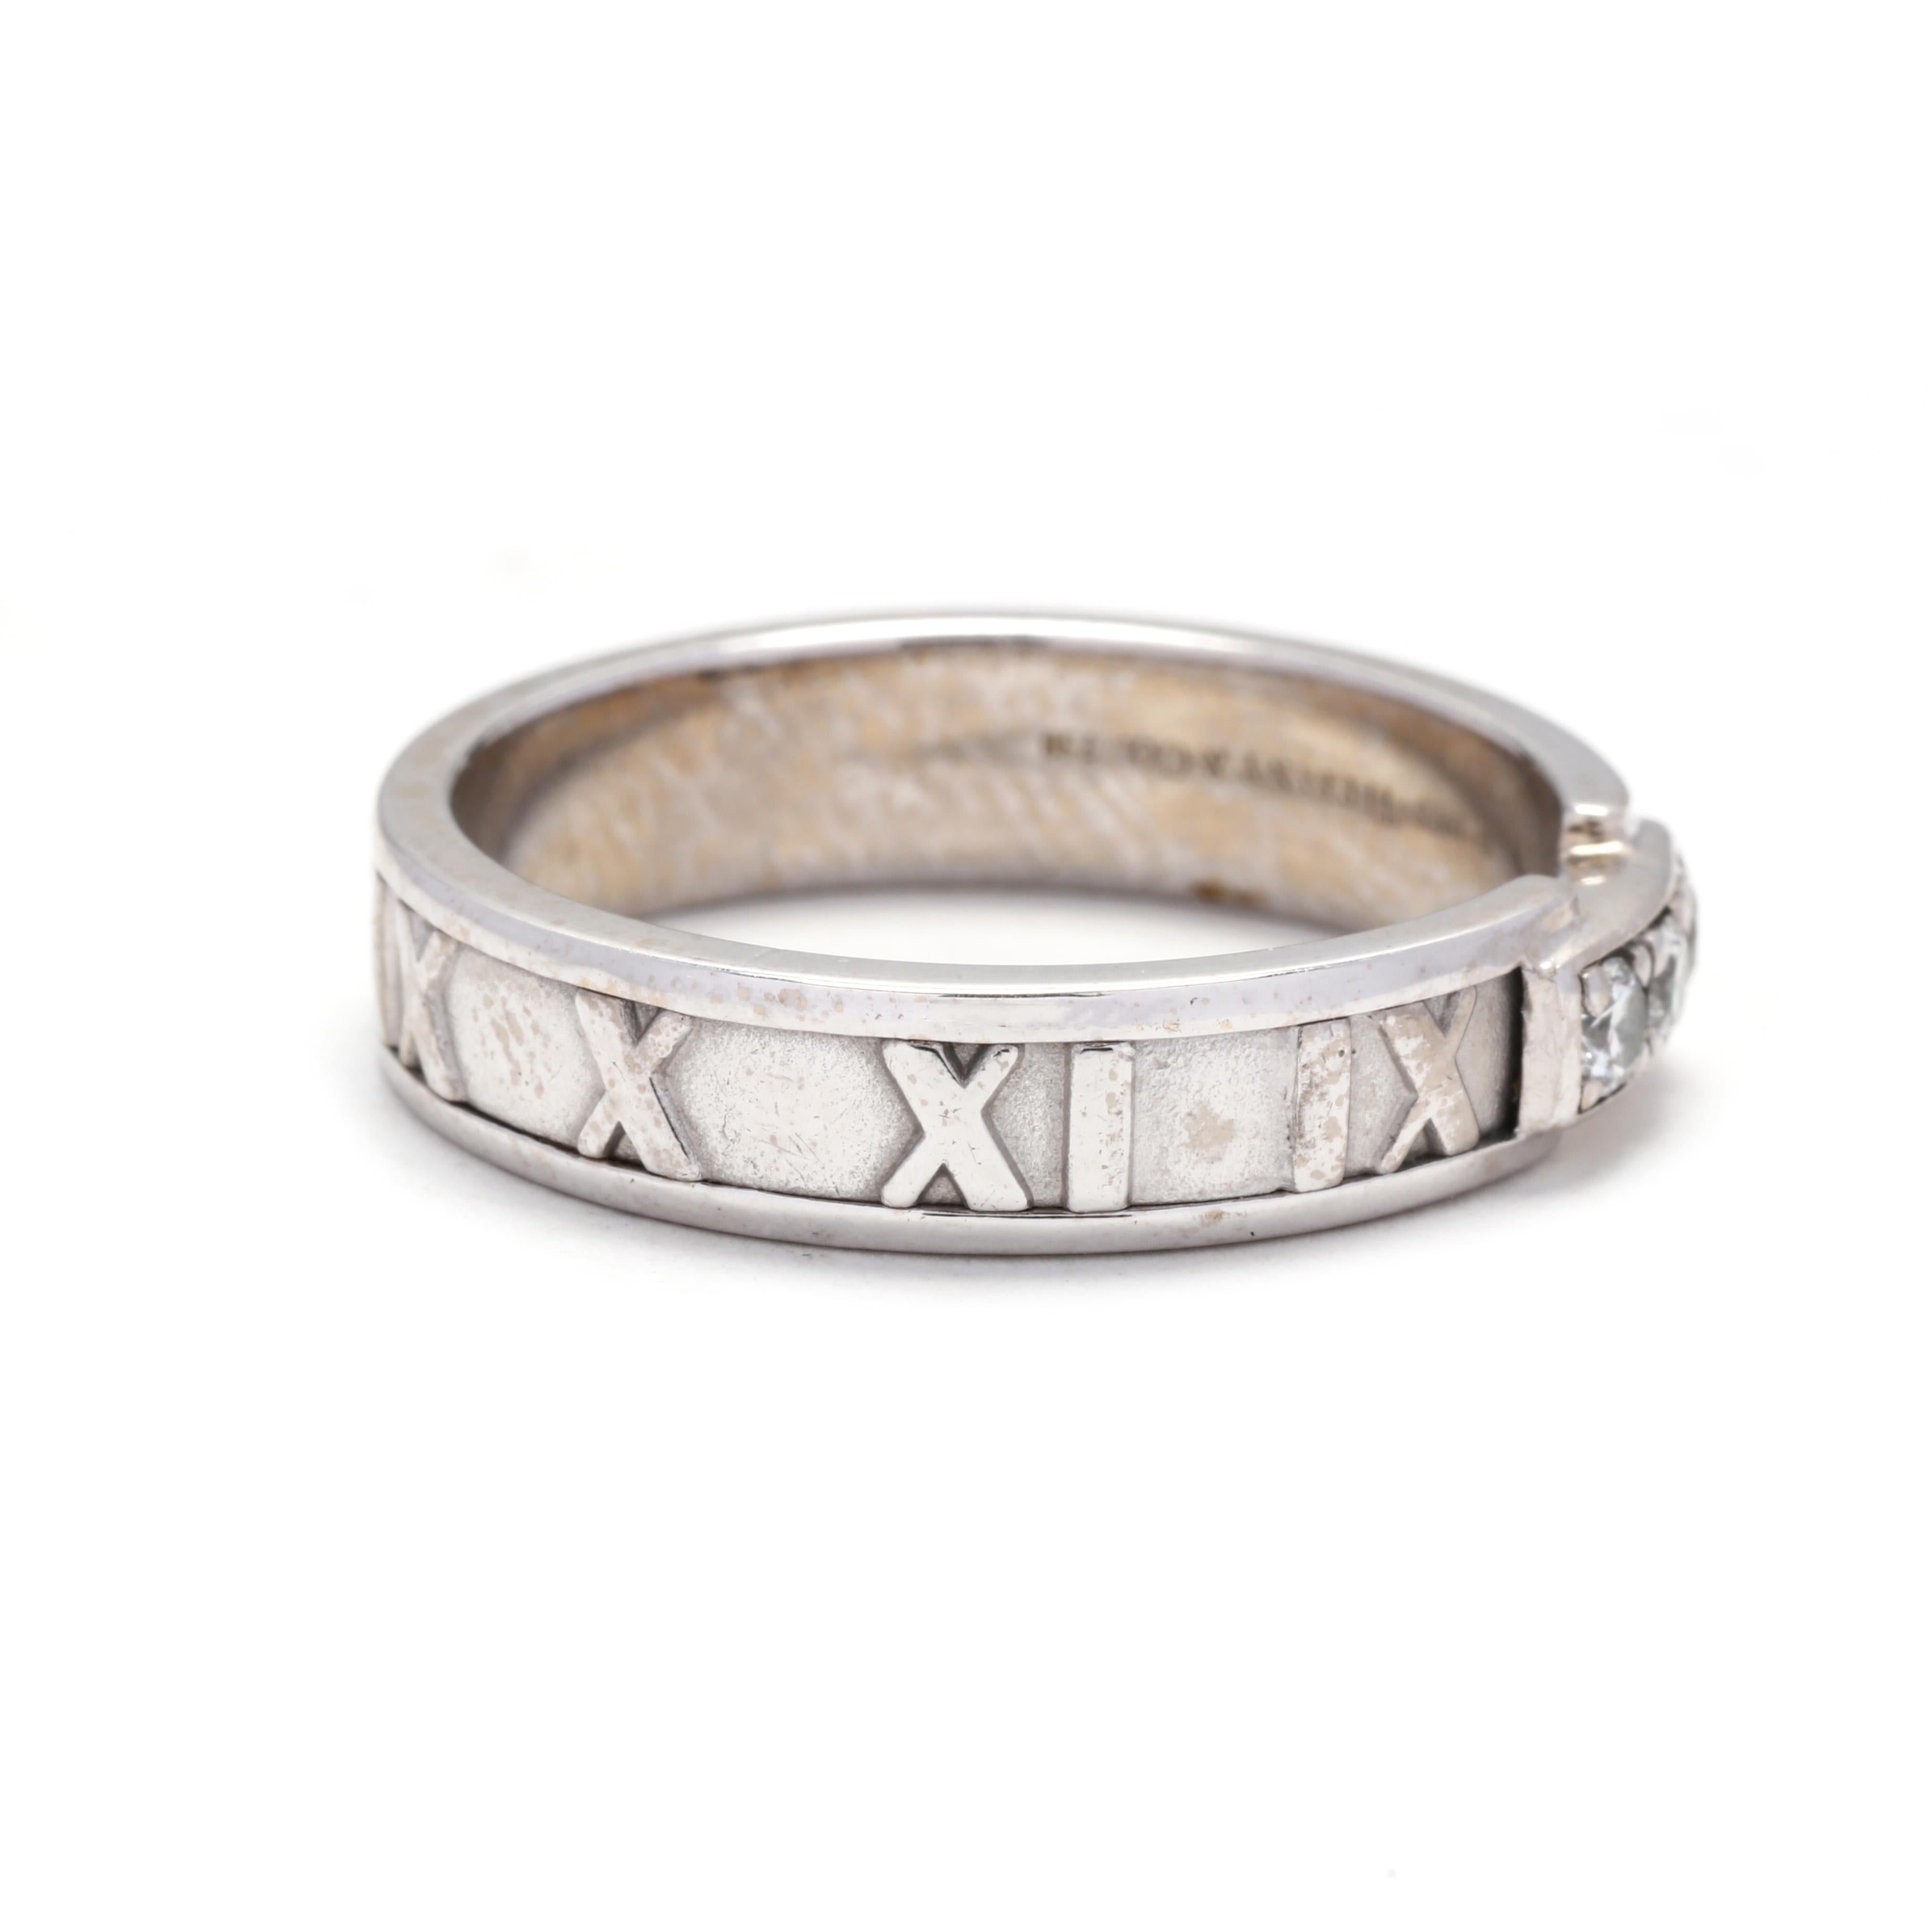 A vintage 18 karat white gold diamond band by Tiffany and Company. This ring features an eternity design with Roman numeral motifs through out and set with three round brilliant cut diamonds weighing approximately .15 total carats.



Stones:

-